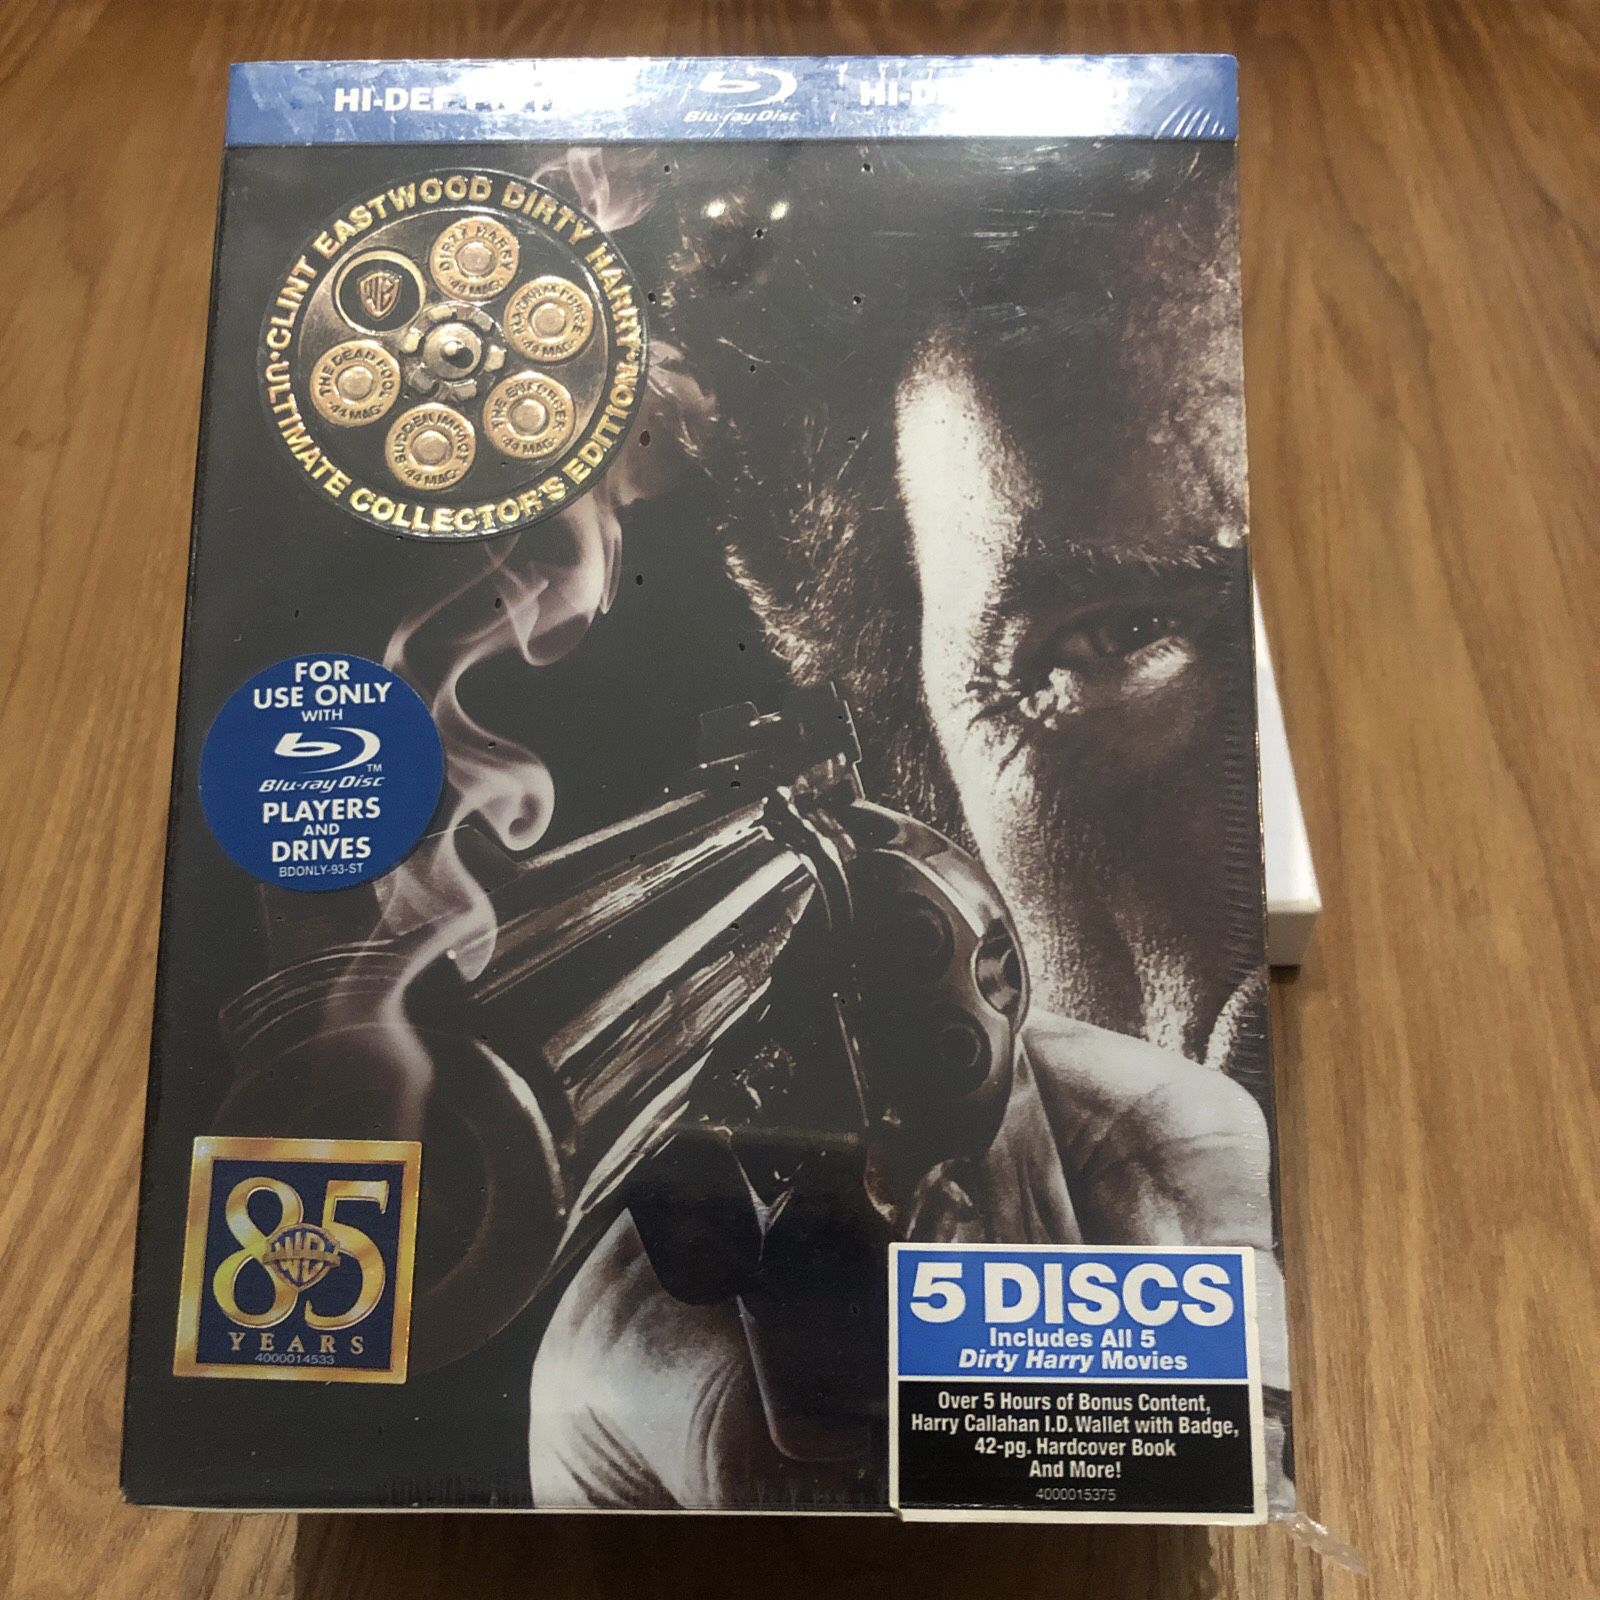 ULTIMATE DIRTY HARRY COLLECTION [Blu-ray Box Set] Clint Eastwood